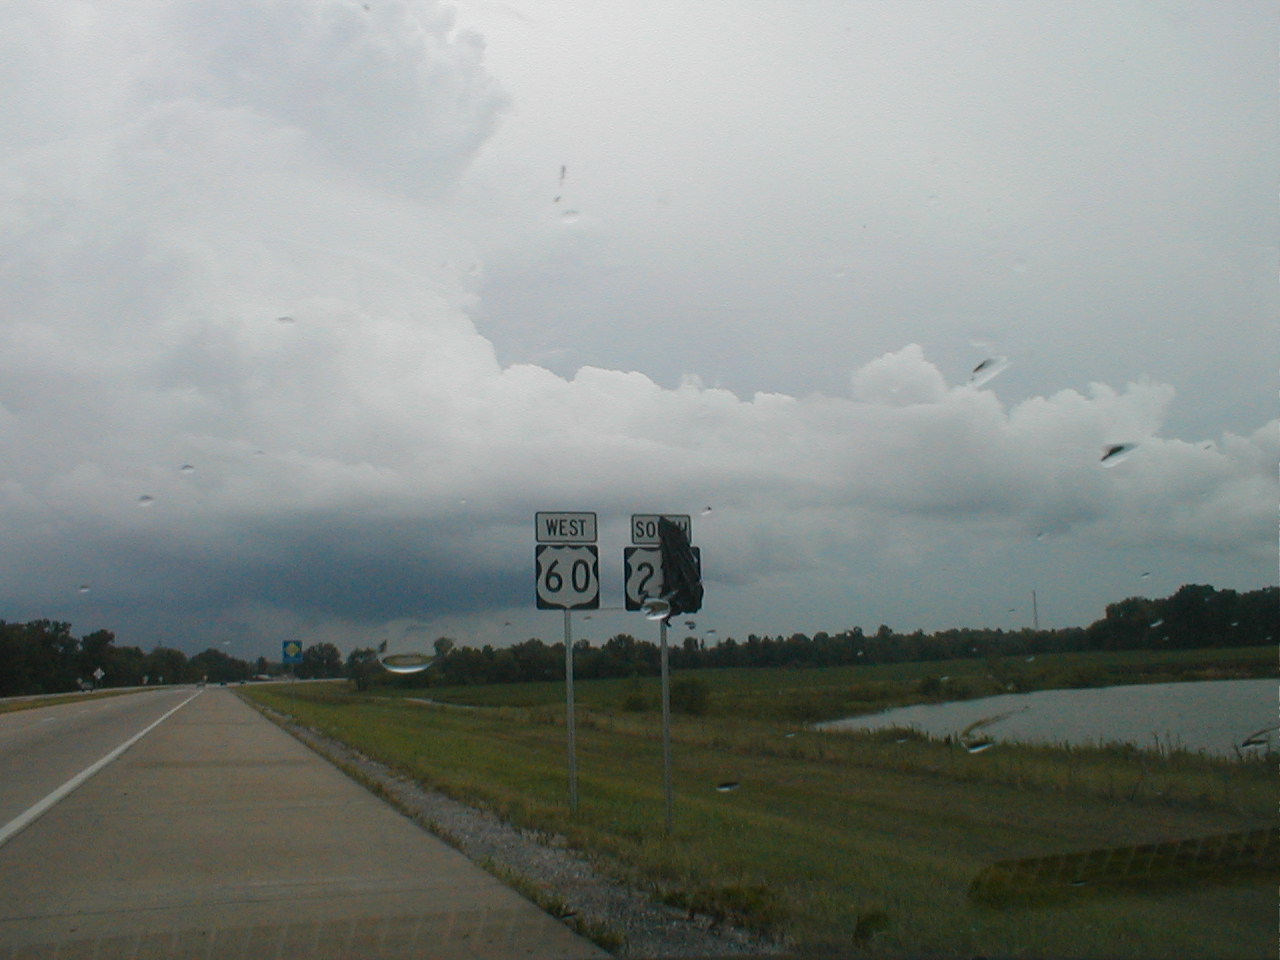 A US 60 sign and a partially covered US 231 sign.